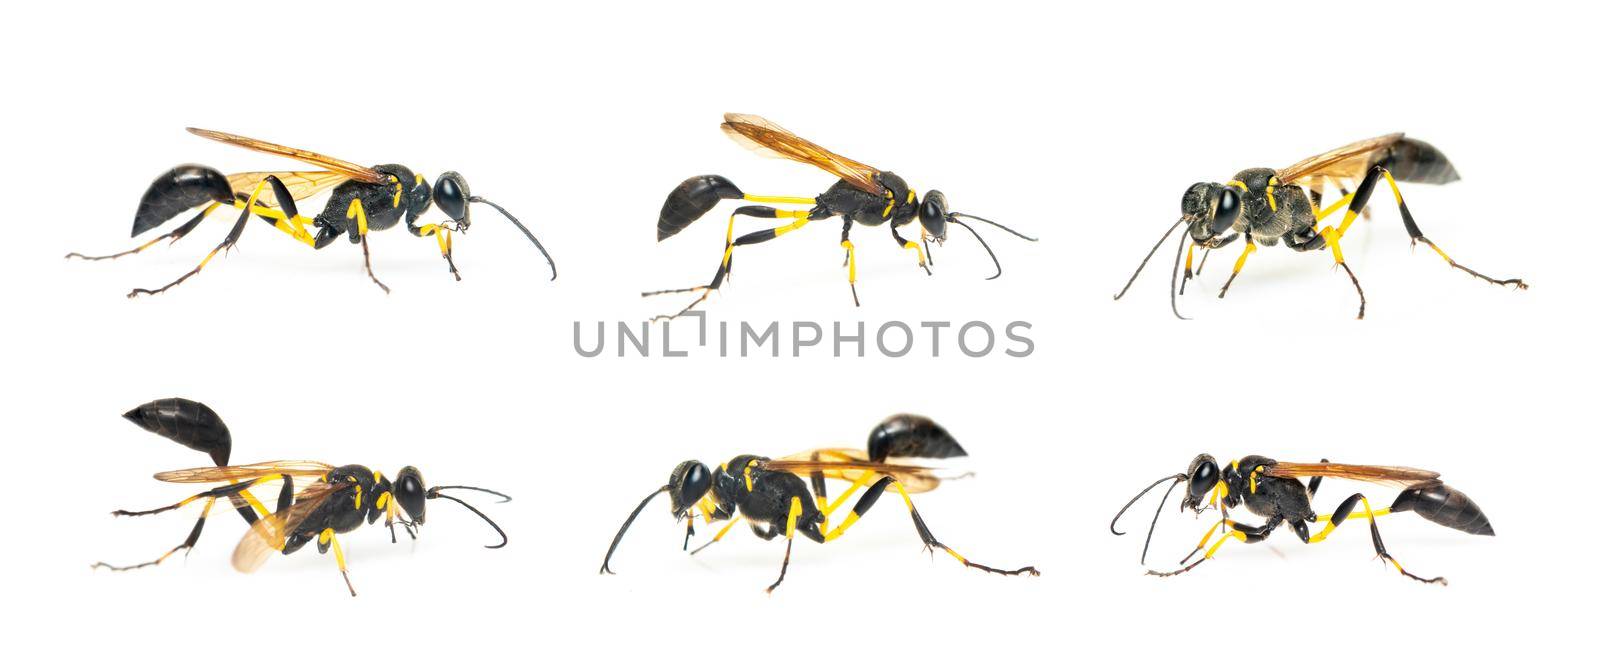 Group of mud dauber wasp(Sphecidae) isolated on white background. Insect. Animal.